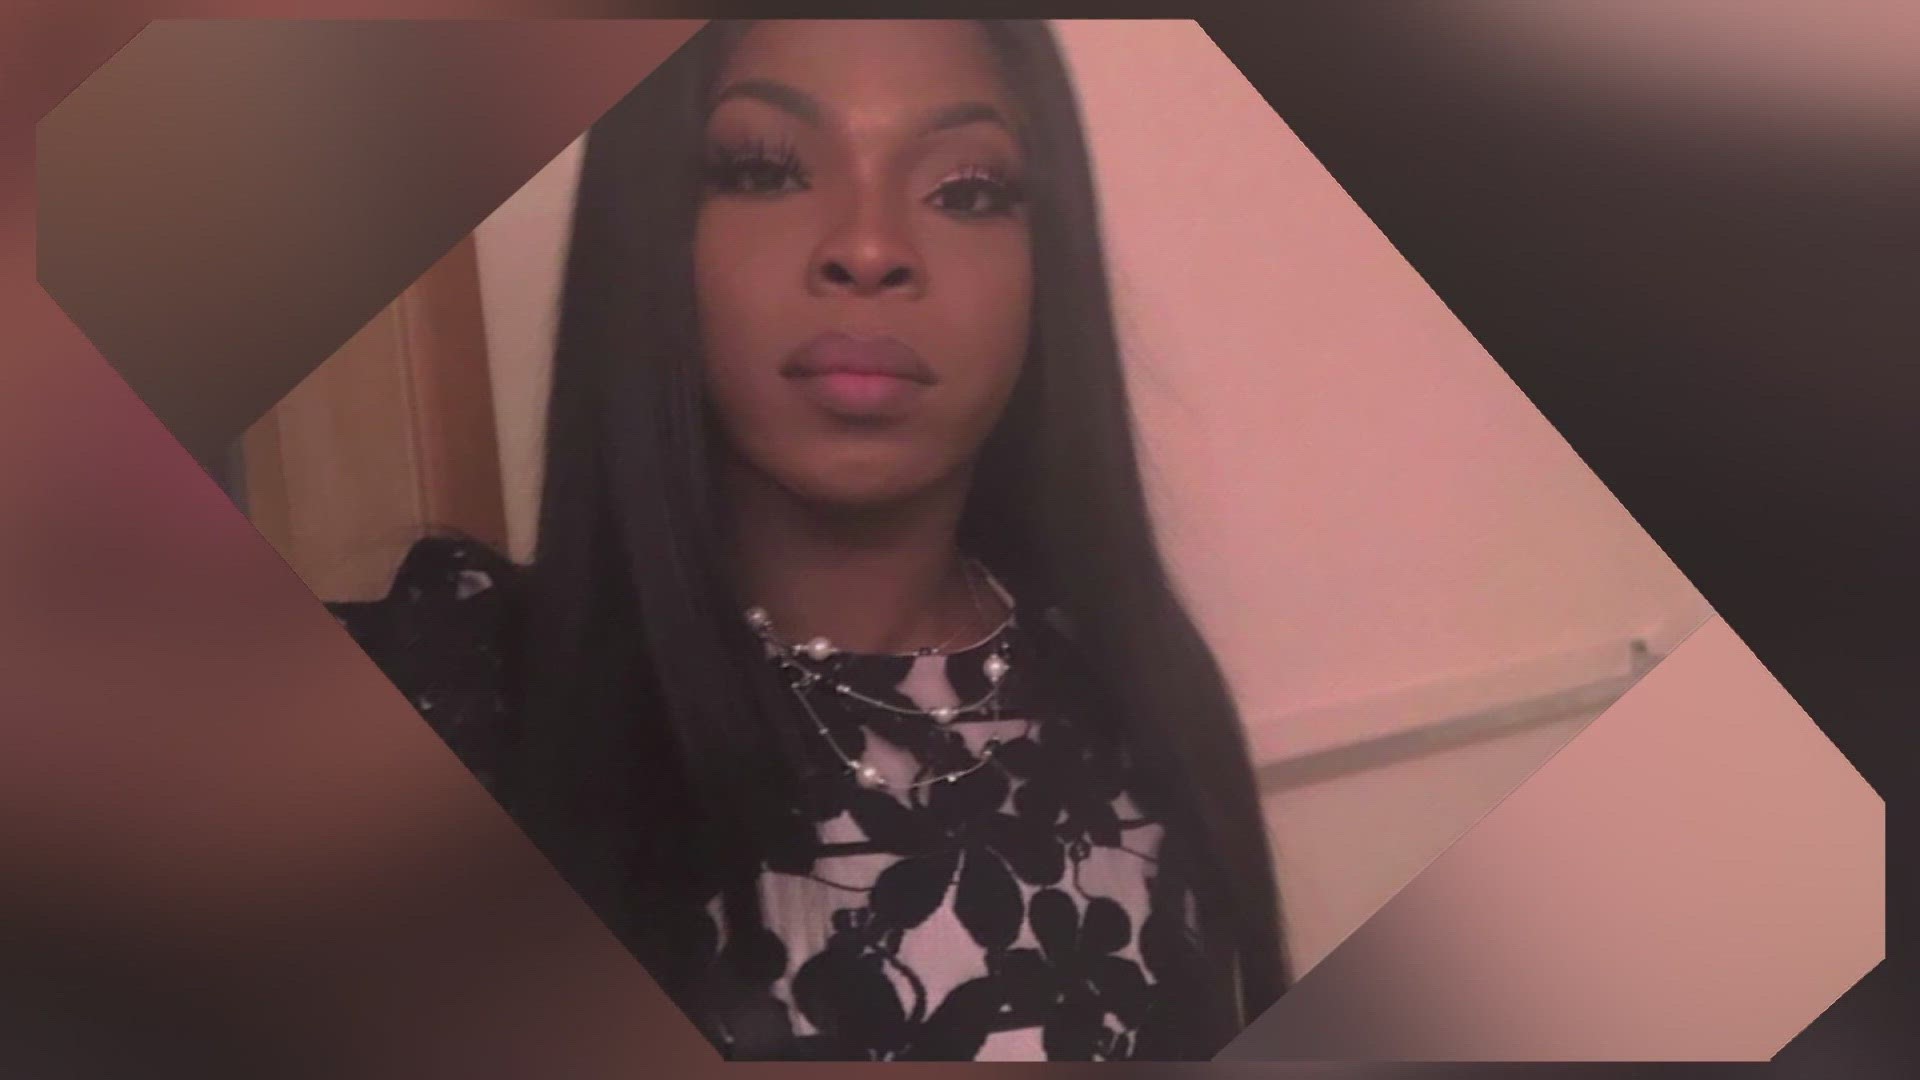 Muhlaysia Booker was found murdered in Dallas in May 2019.